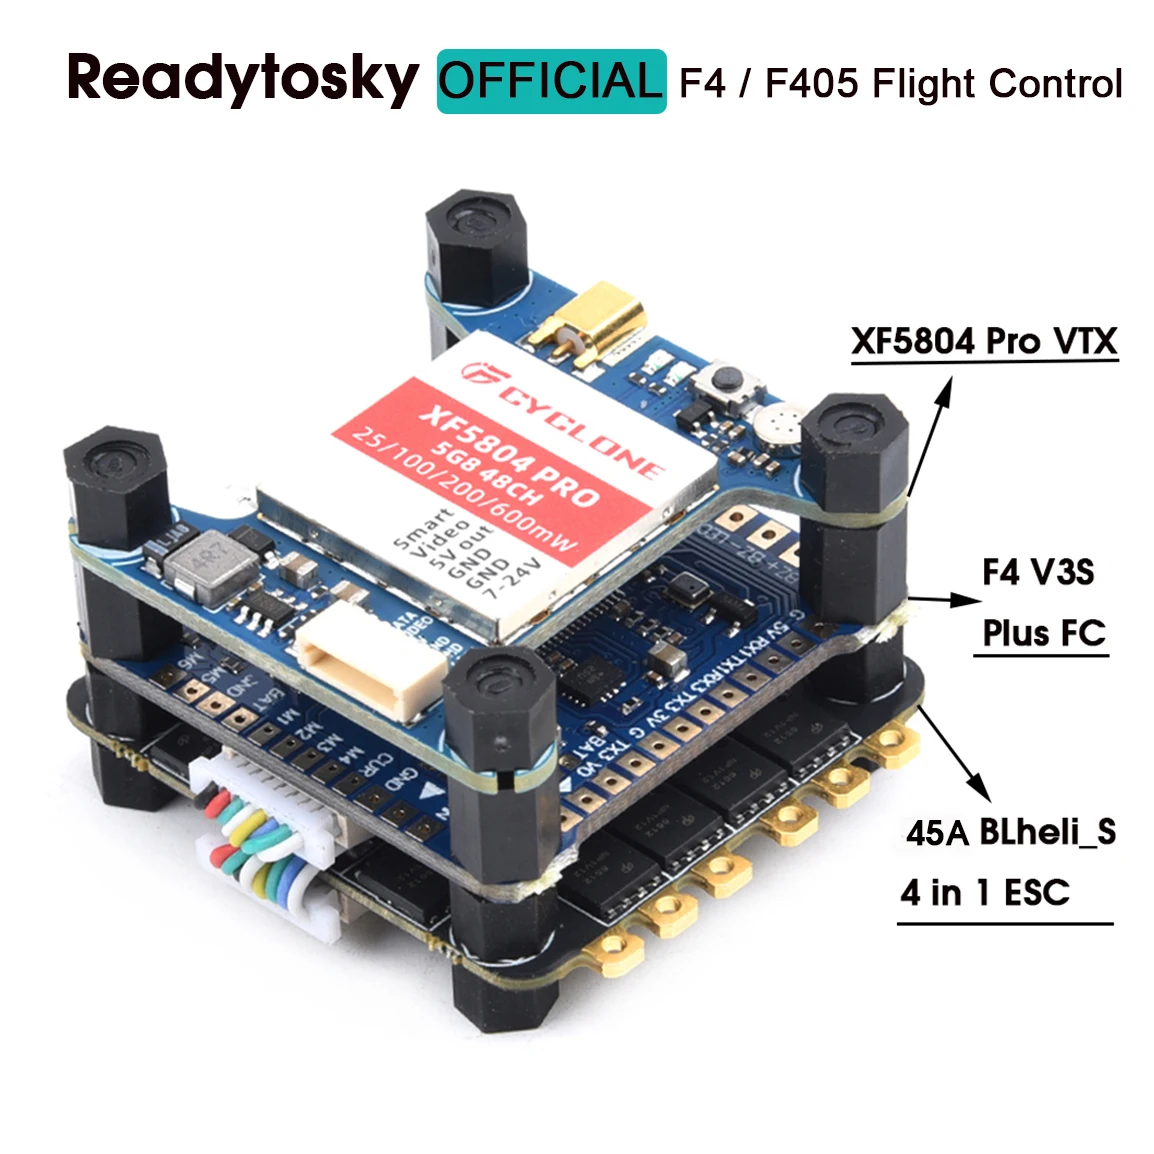 Control de vuelo 45A 4 en 1 ESC y F4 V3S Plus / F405 F4 V1.1/XF5804 PRO 48CH para FPV RC Racer Freestyle Drone